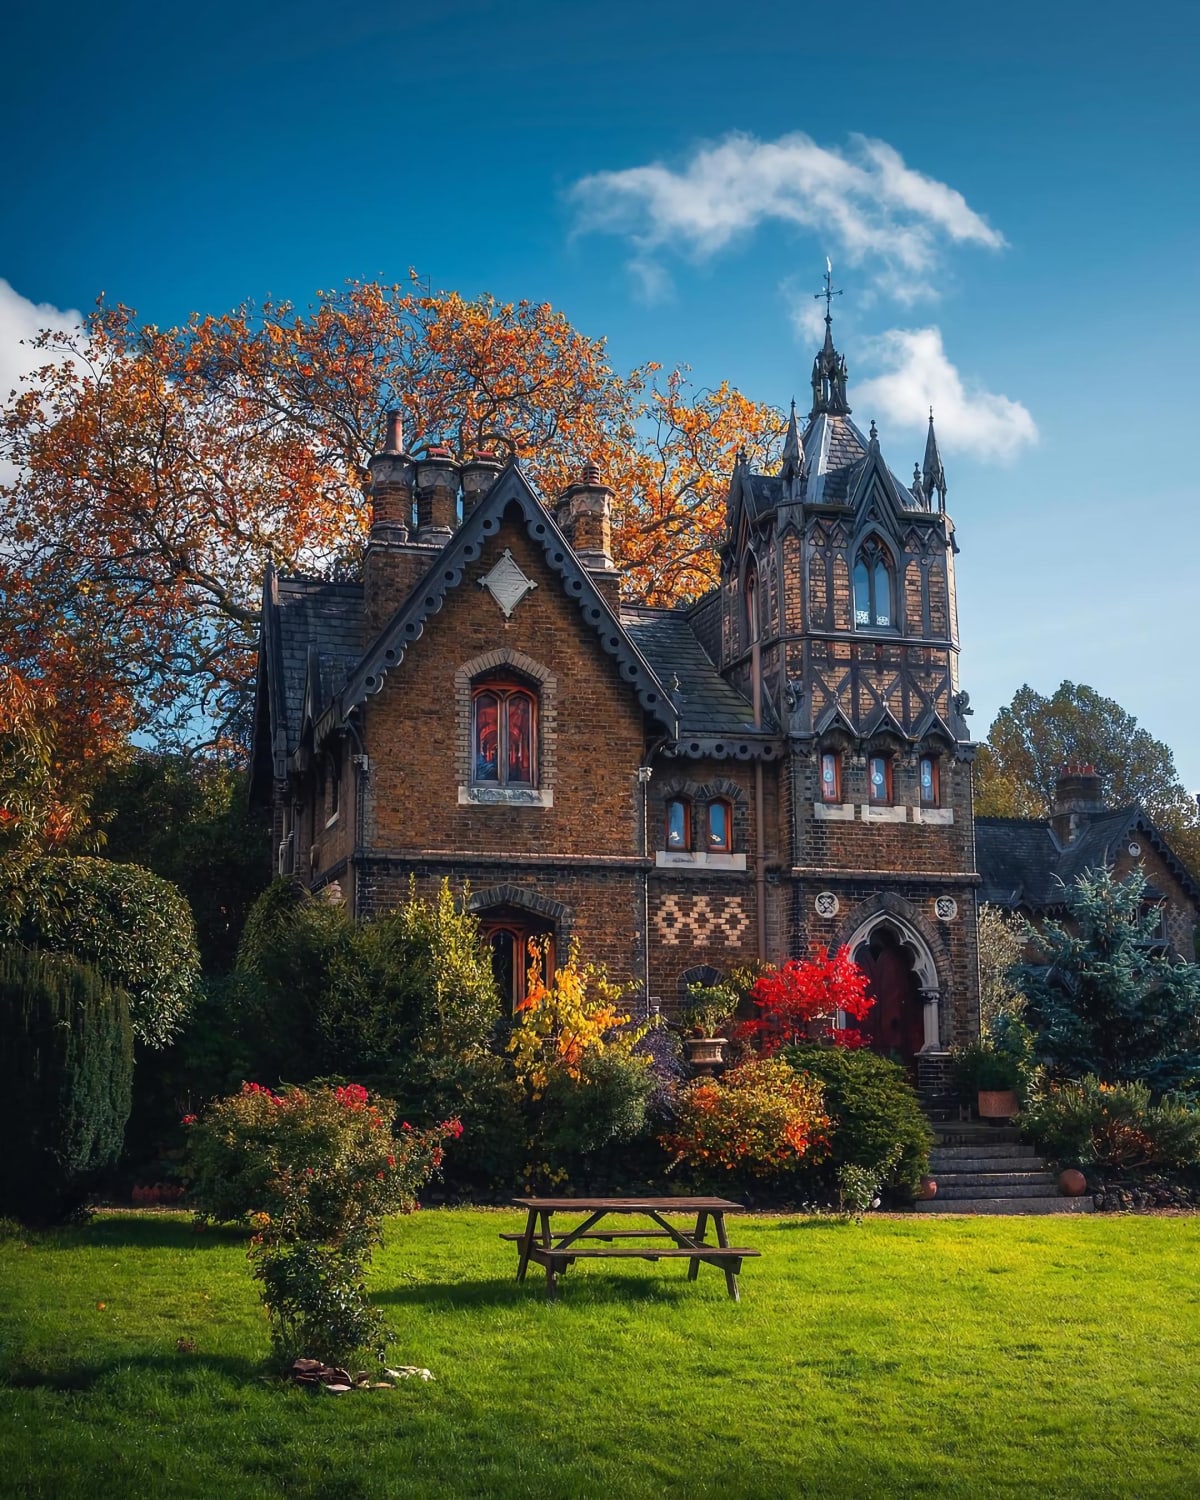 Gothic looking building in Highgate, London